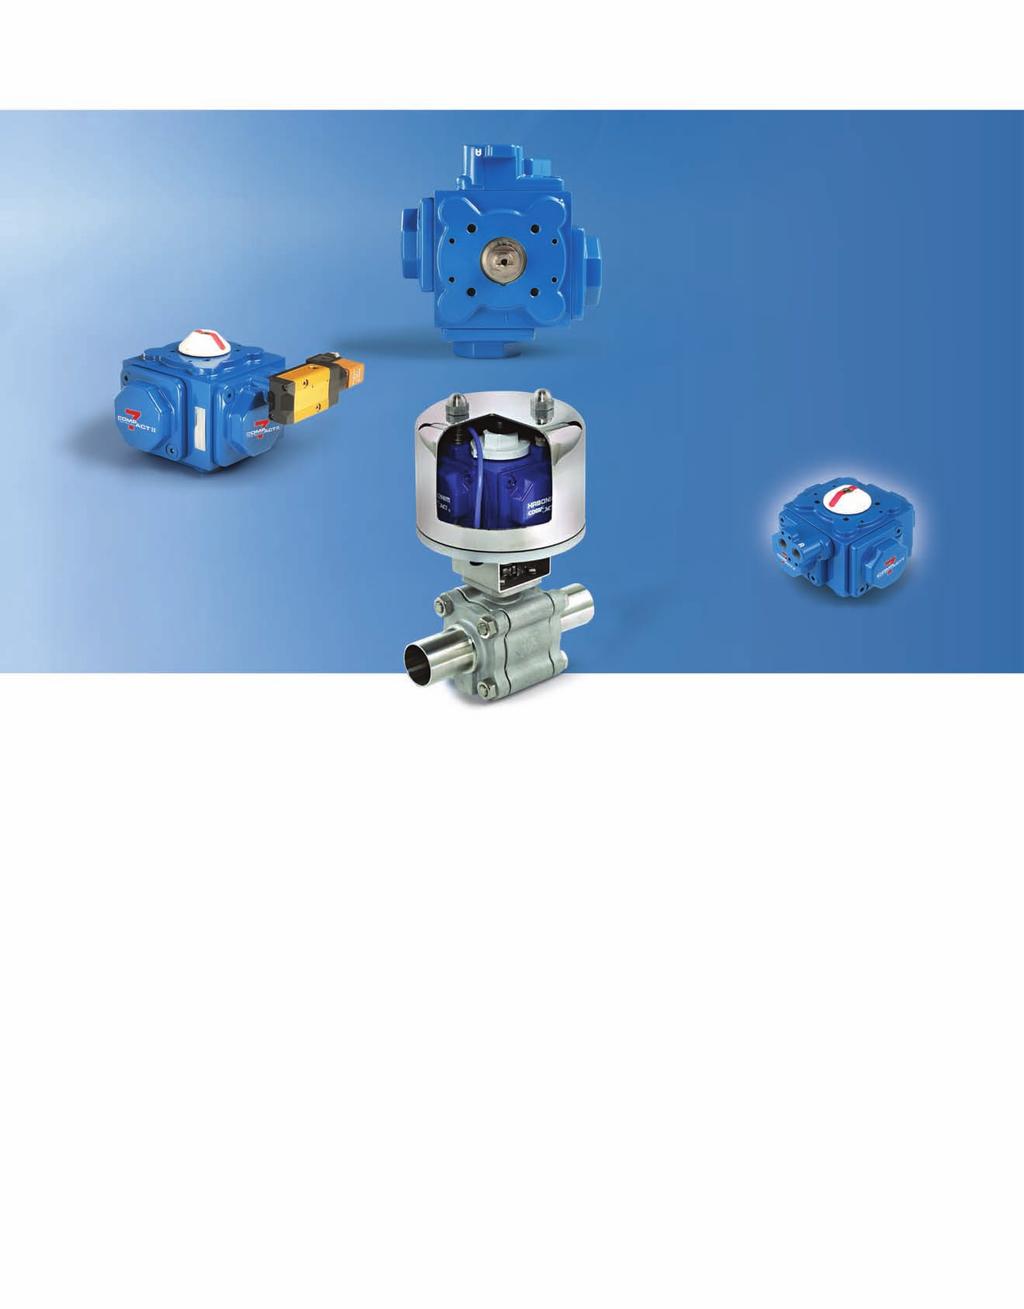 NAMUR & ISO Interface An extensive range of accessories such as Solenoids, Positioners and Limit Switches are available for direct mounting to the COMPACT II actuator.